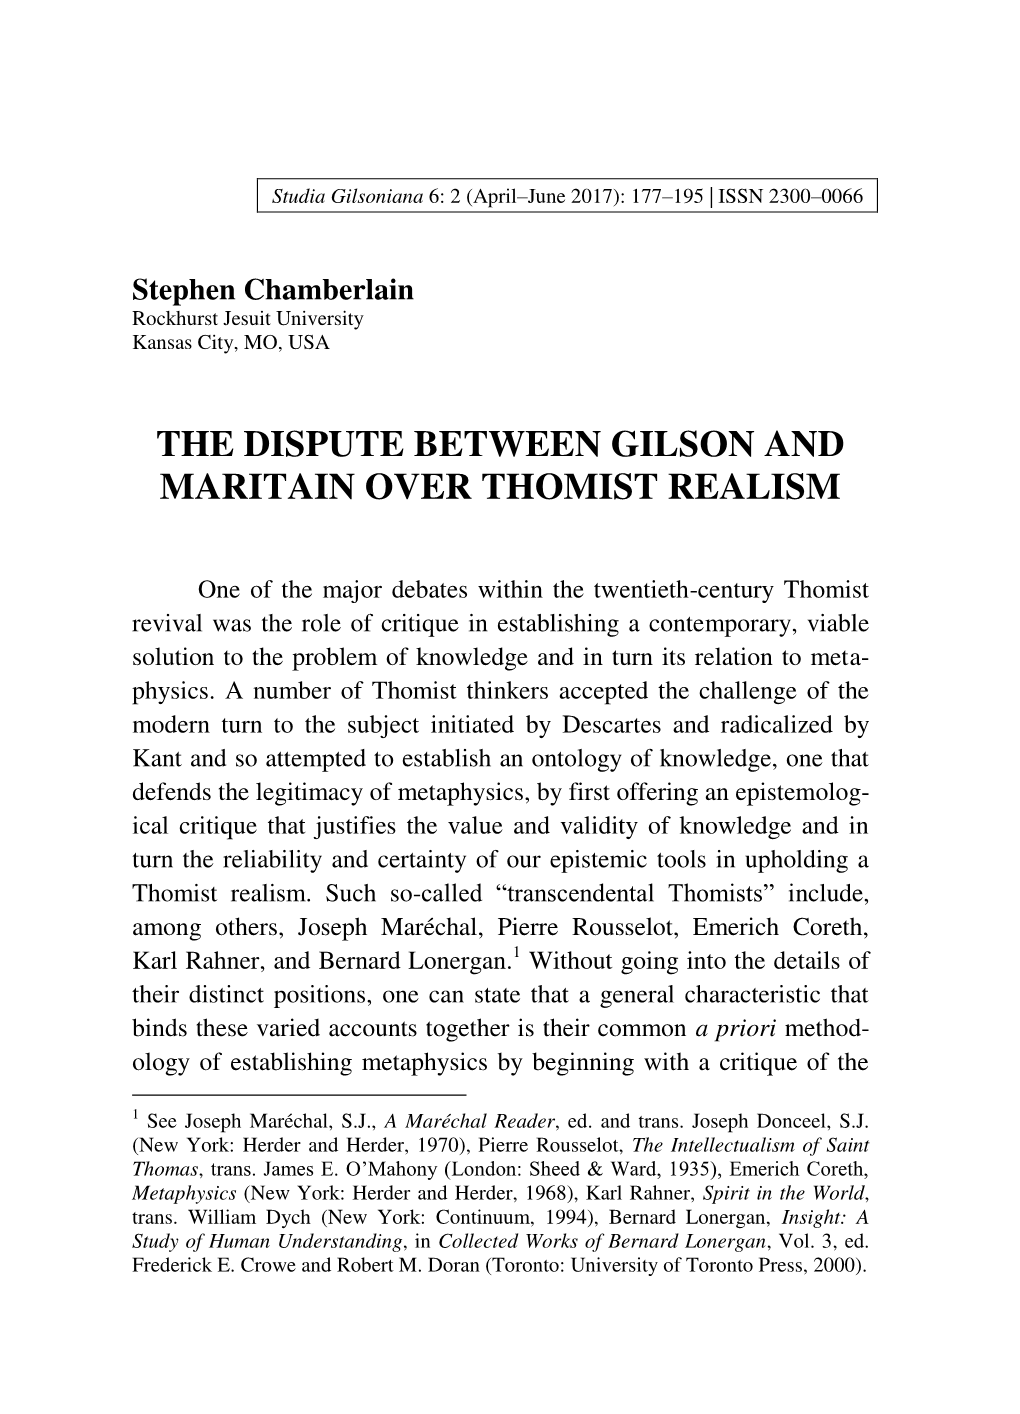 The Dispute Between Gilson and Maritain Over Thomist Realism